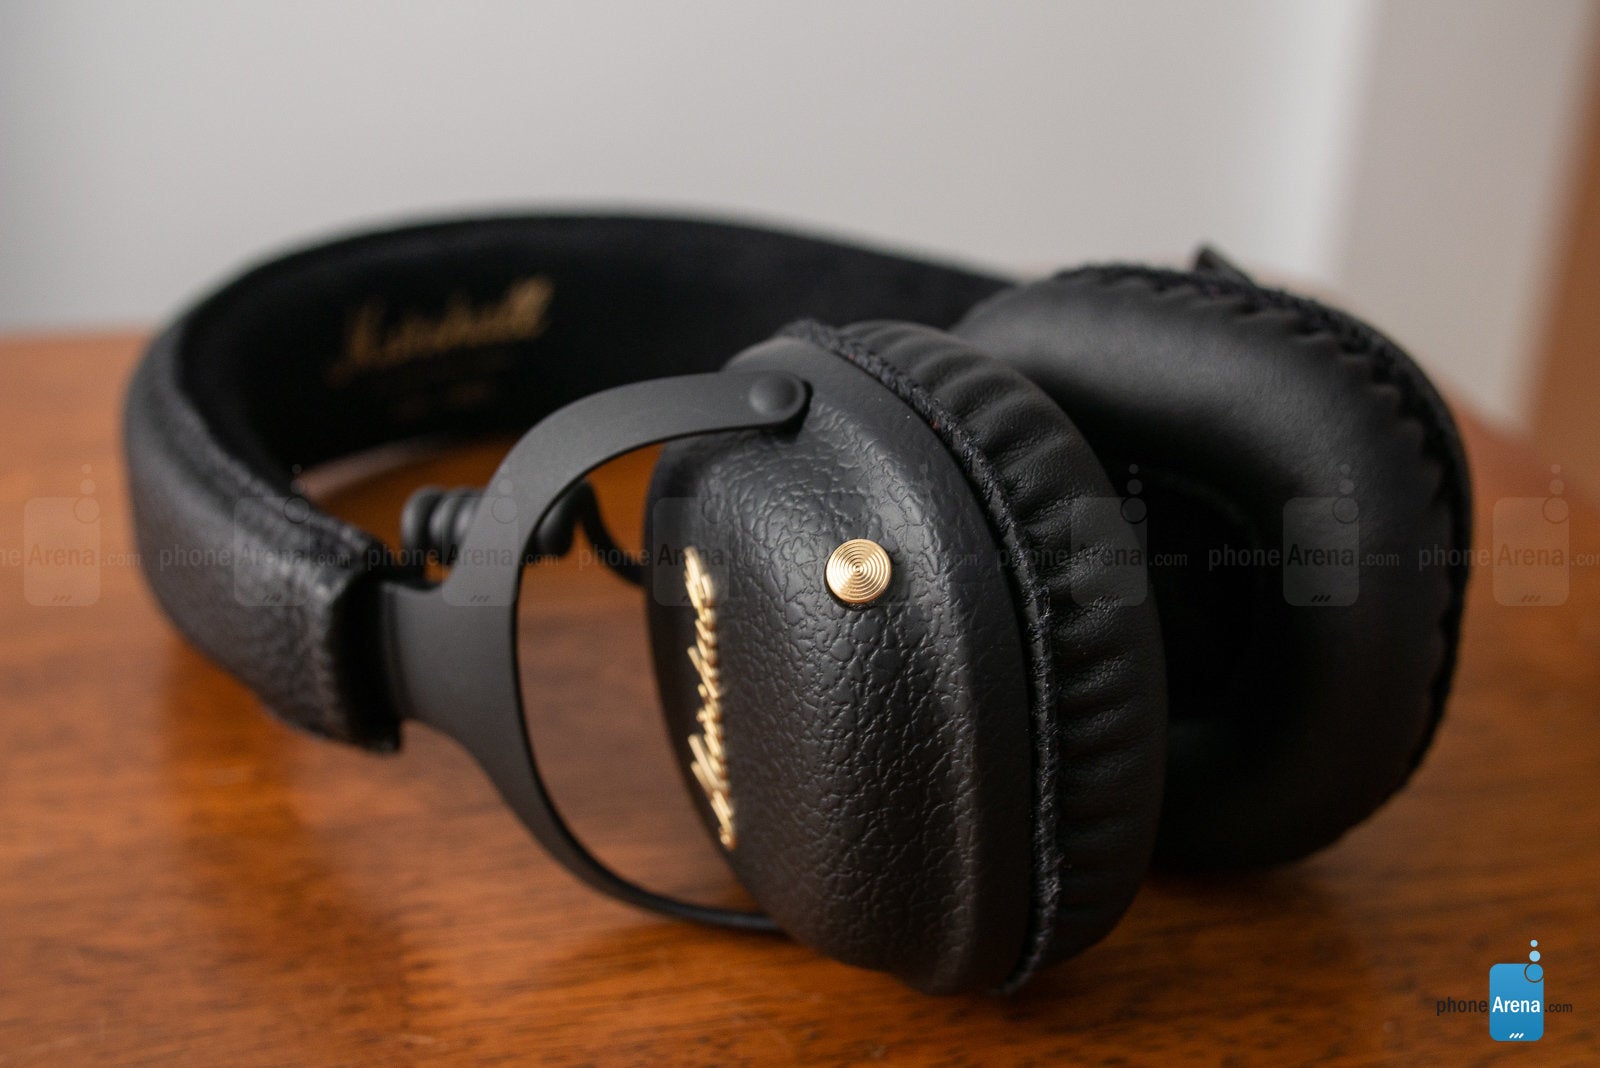 The multi-directional knob - Marshall MID ANC headphones review